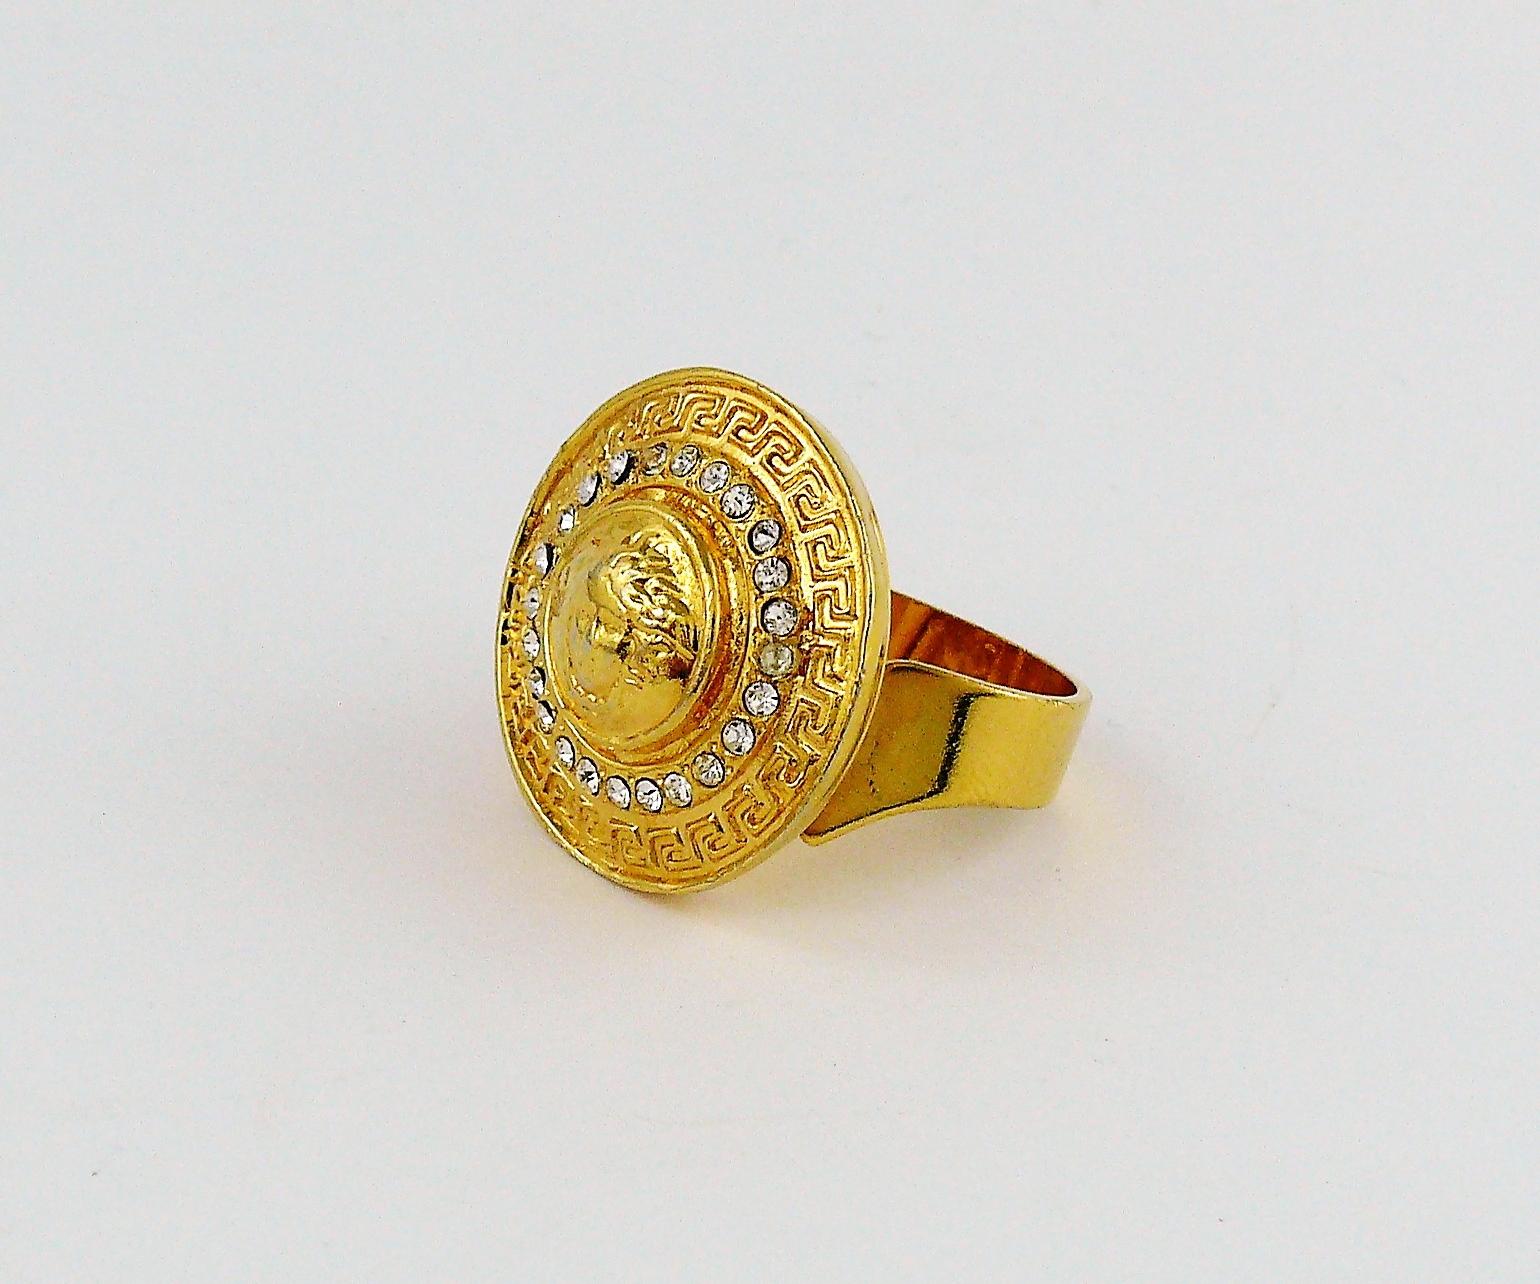 GIANNI VERSACE vintage gold toned MEDUSA ring embellished with clear crystals.

Adjustable size.

Embossed GIANNI VERSACE Made in Italy.

Indicative measurements : diameter approx. 2.2 cm (0.87 inch).

JEWELRY CONDITION CHART
- New or never worn :